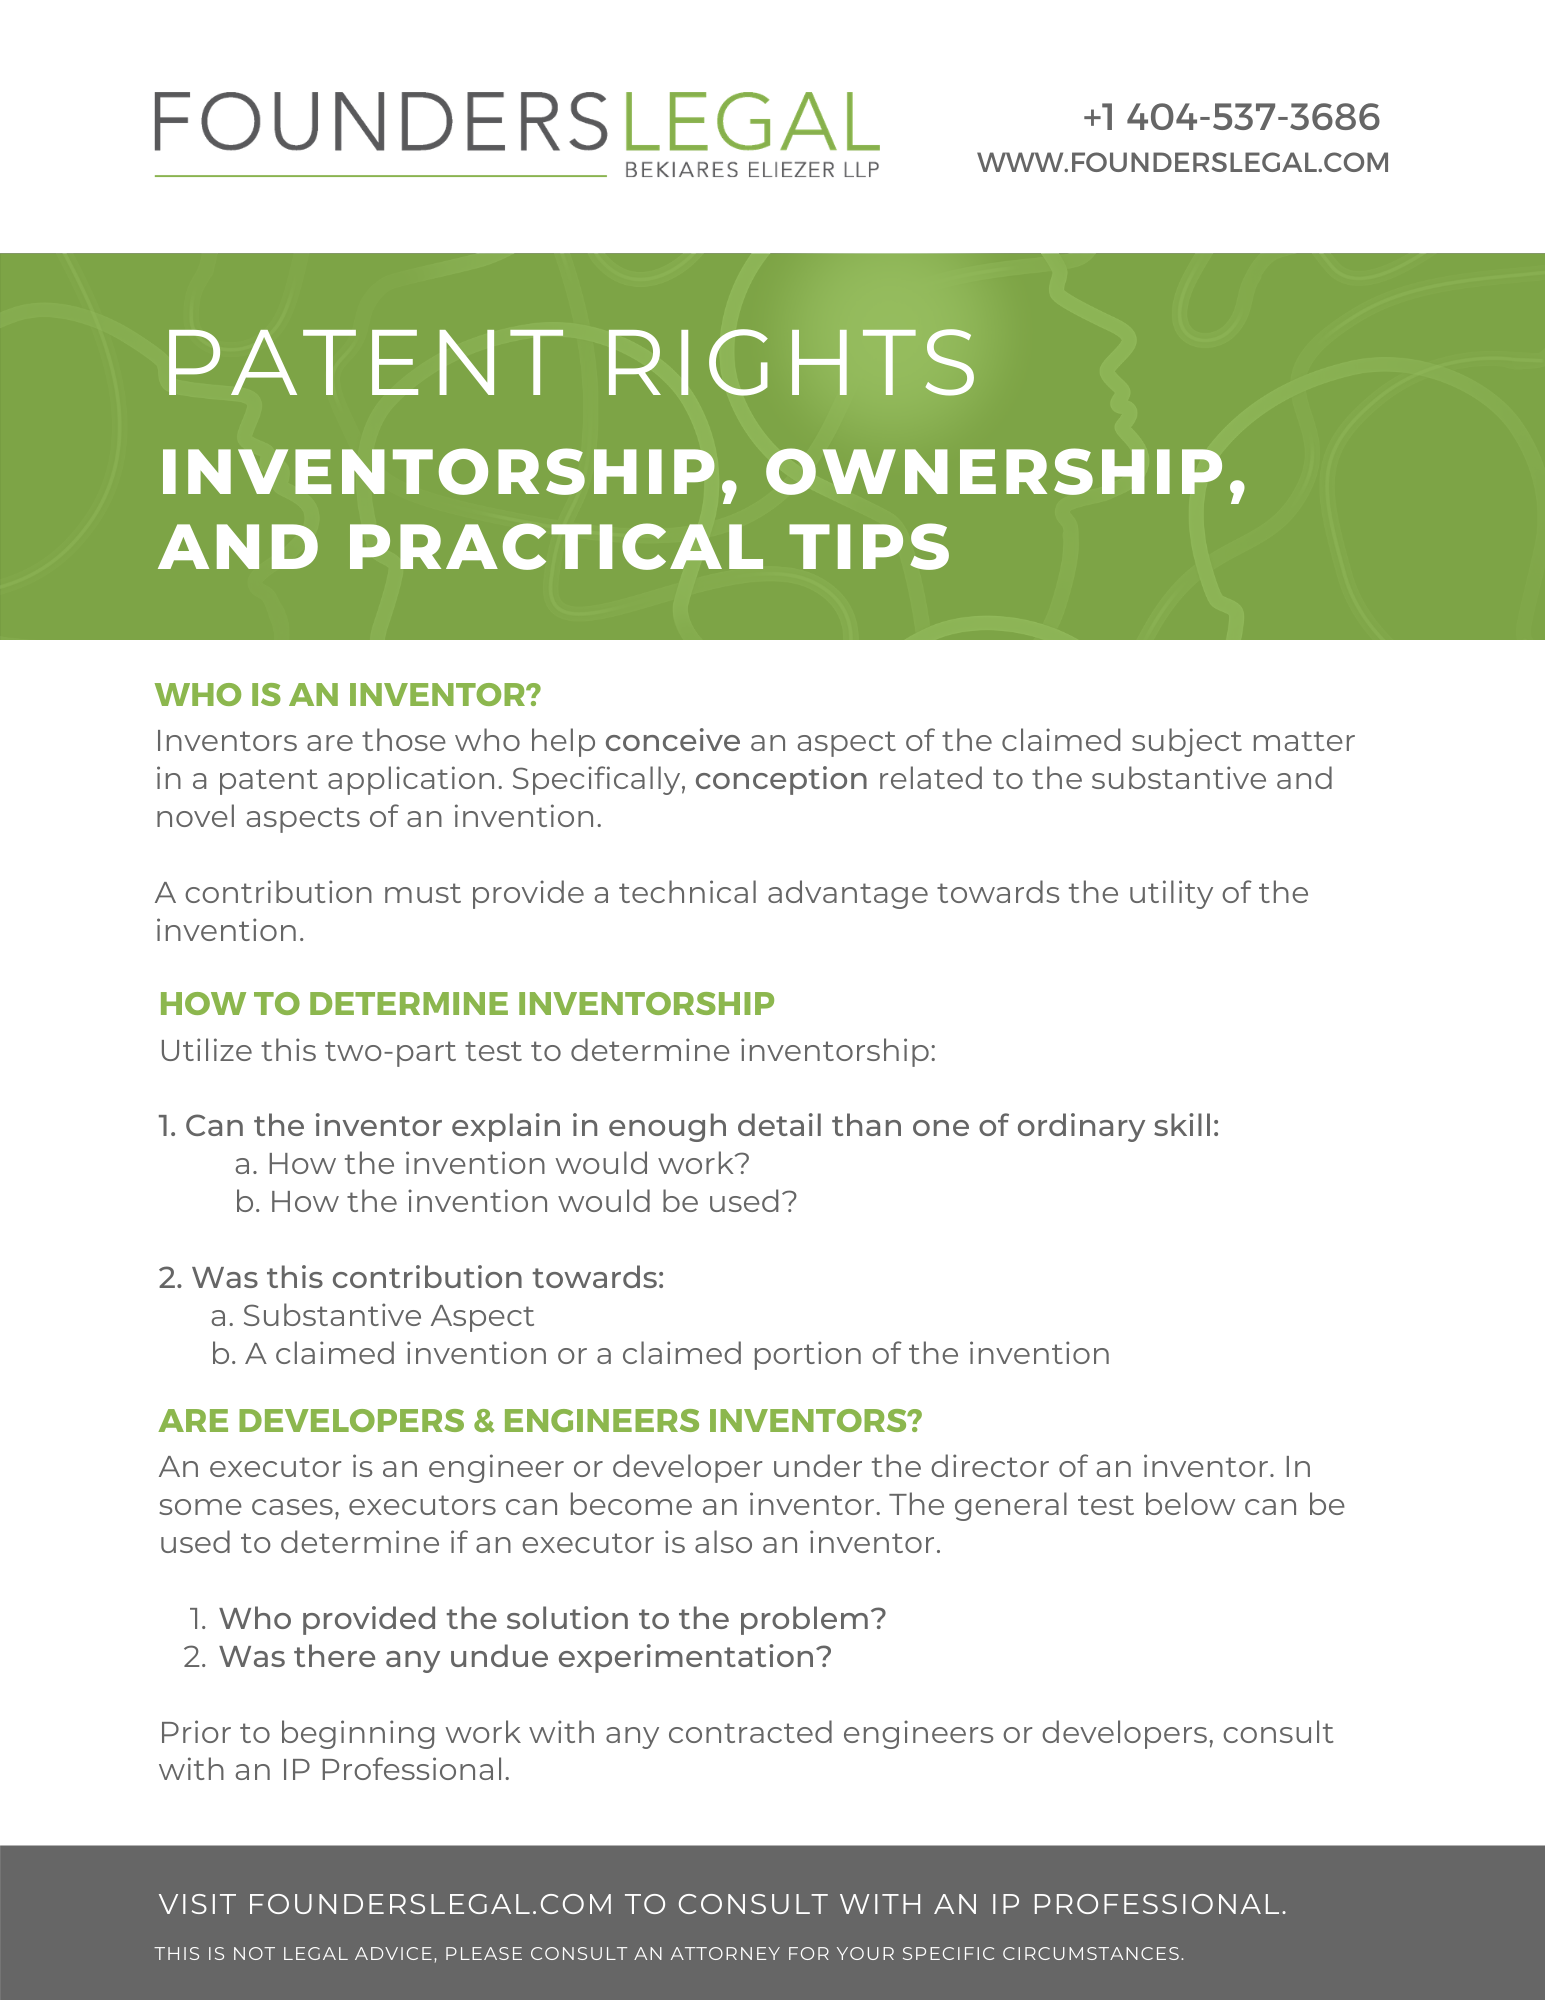 Patent Rights Guide - Page 01